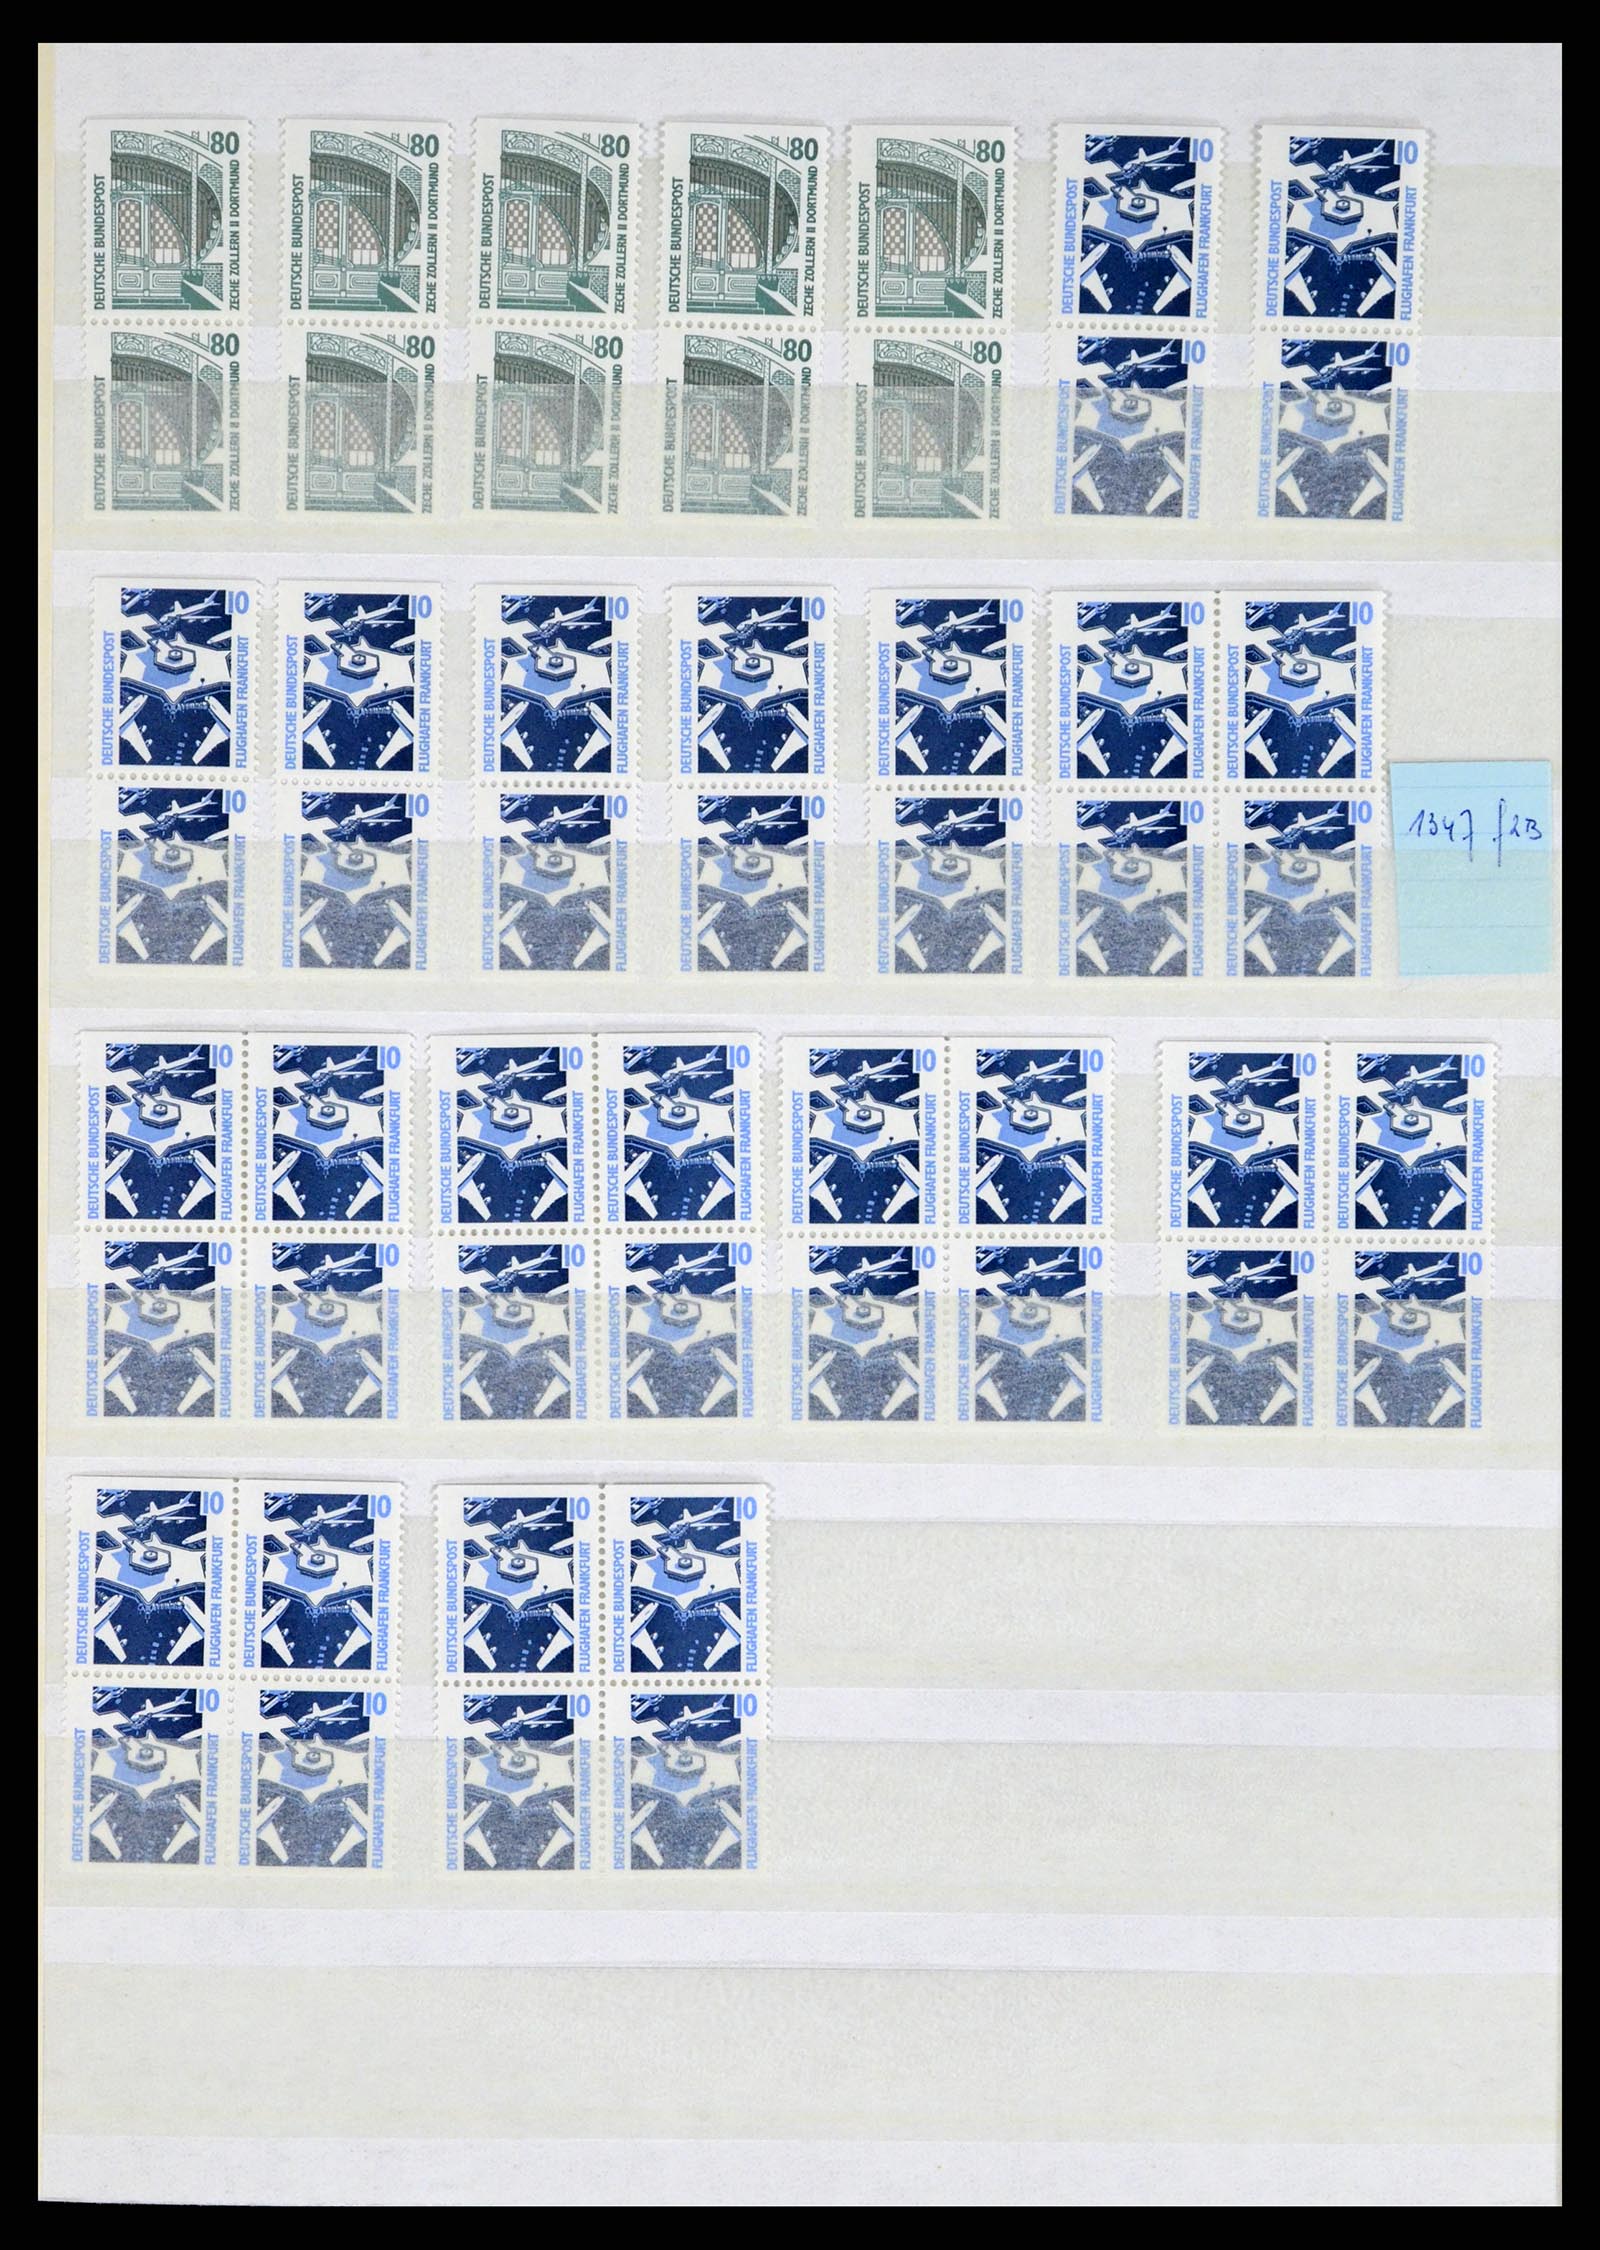 37354 076 - Stamp collection 37354 Bundespost and Berlin 1955-2000.